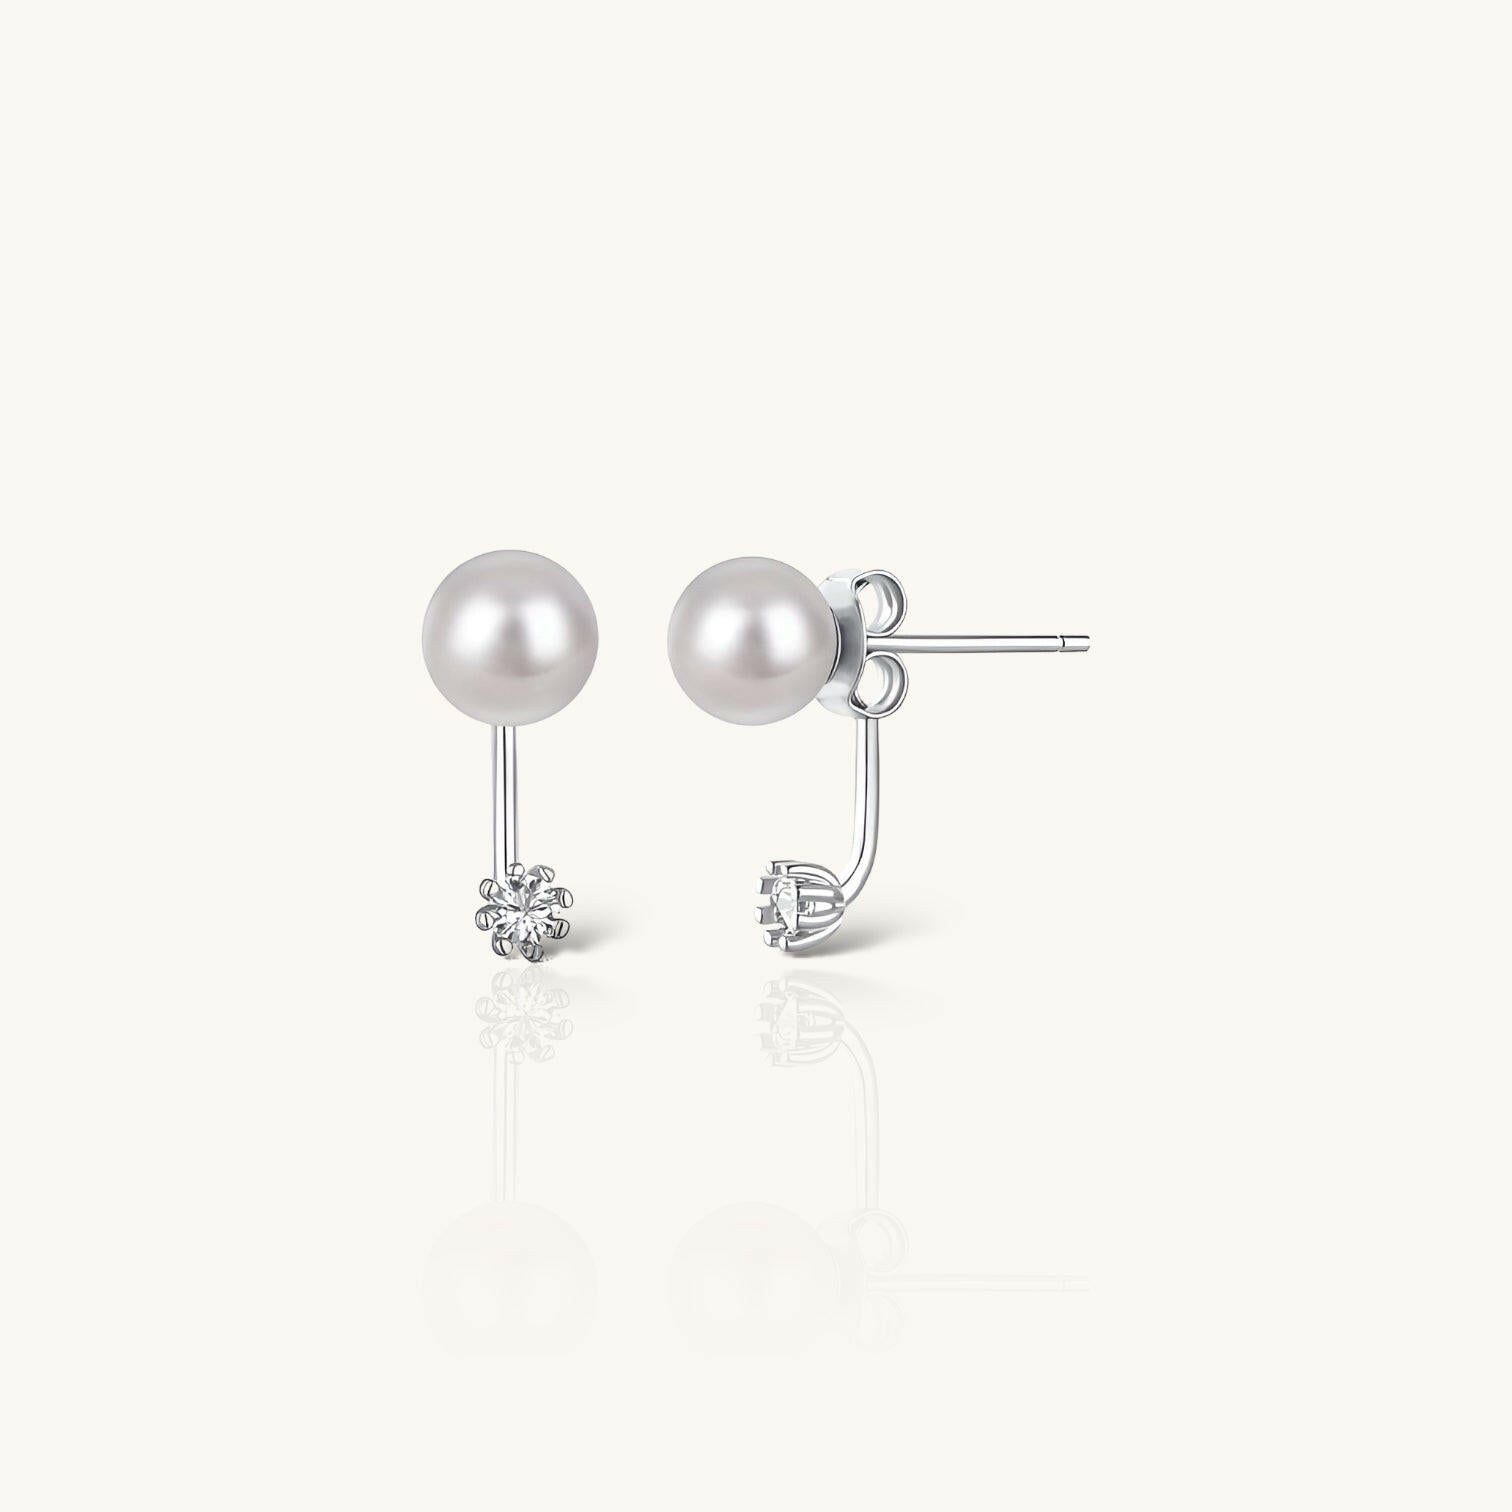 Discover more than 200 blue nile pearl earrings super hot